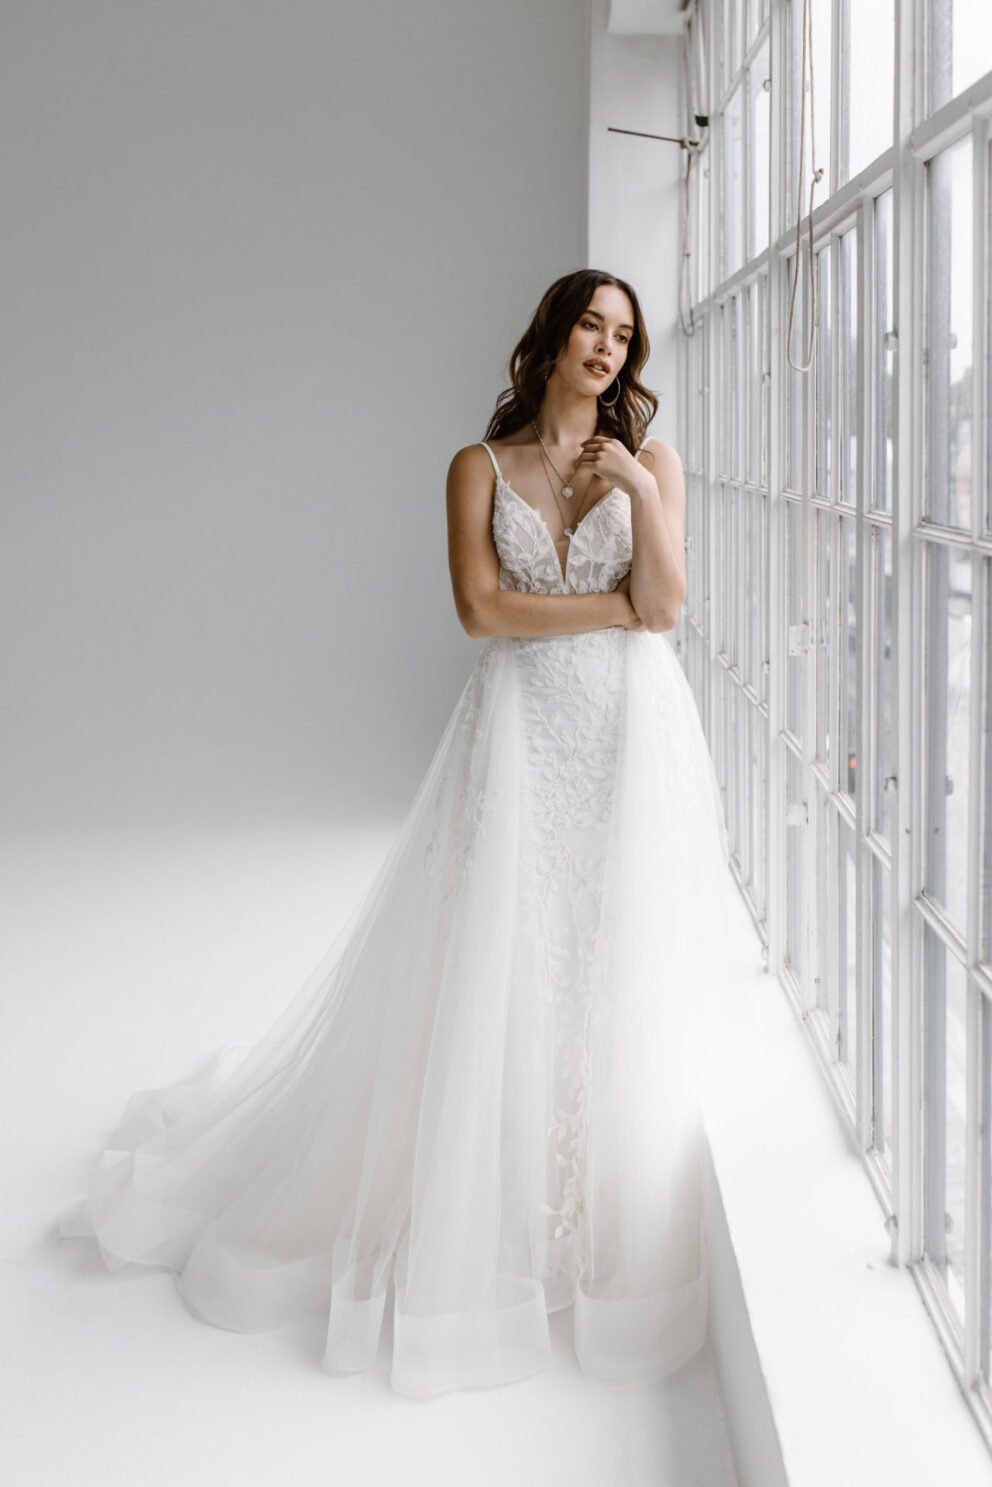 This wedding dress is the essence of love, from the soft illuison bodice to the fishtail shape and detachable half skirt which blooms behind